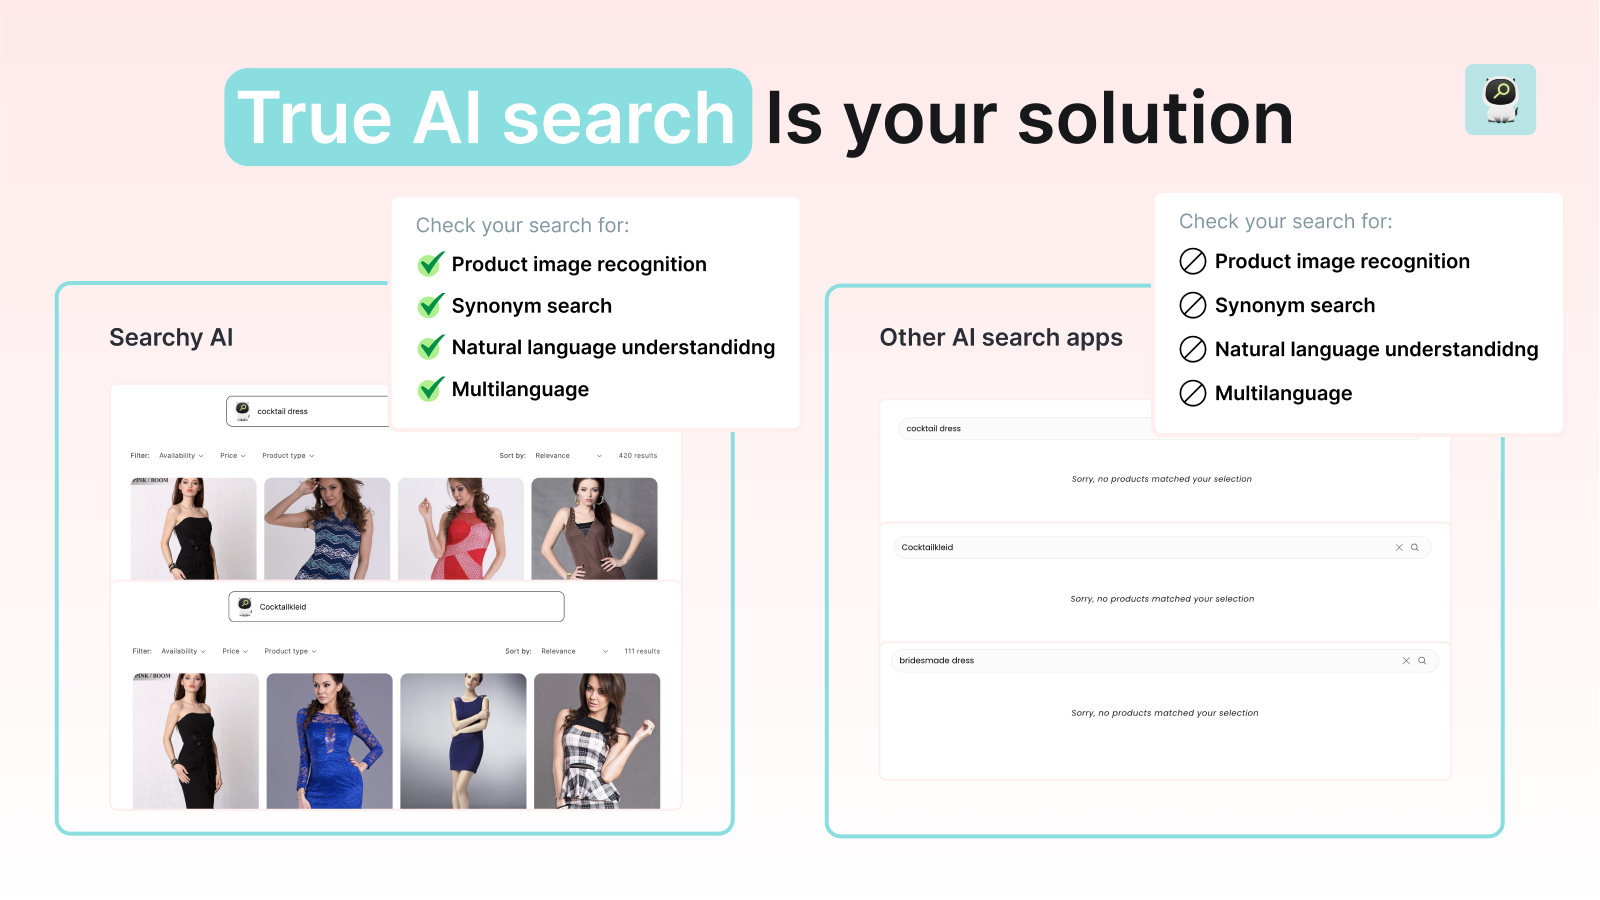 True AI-search is your solution